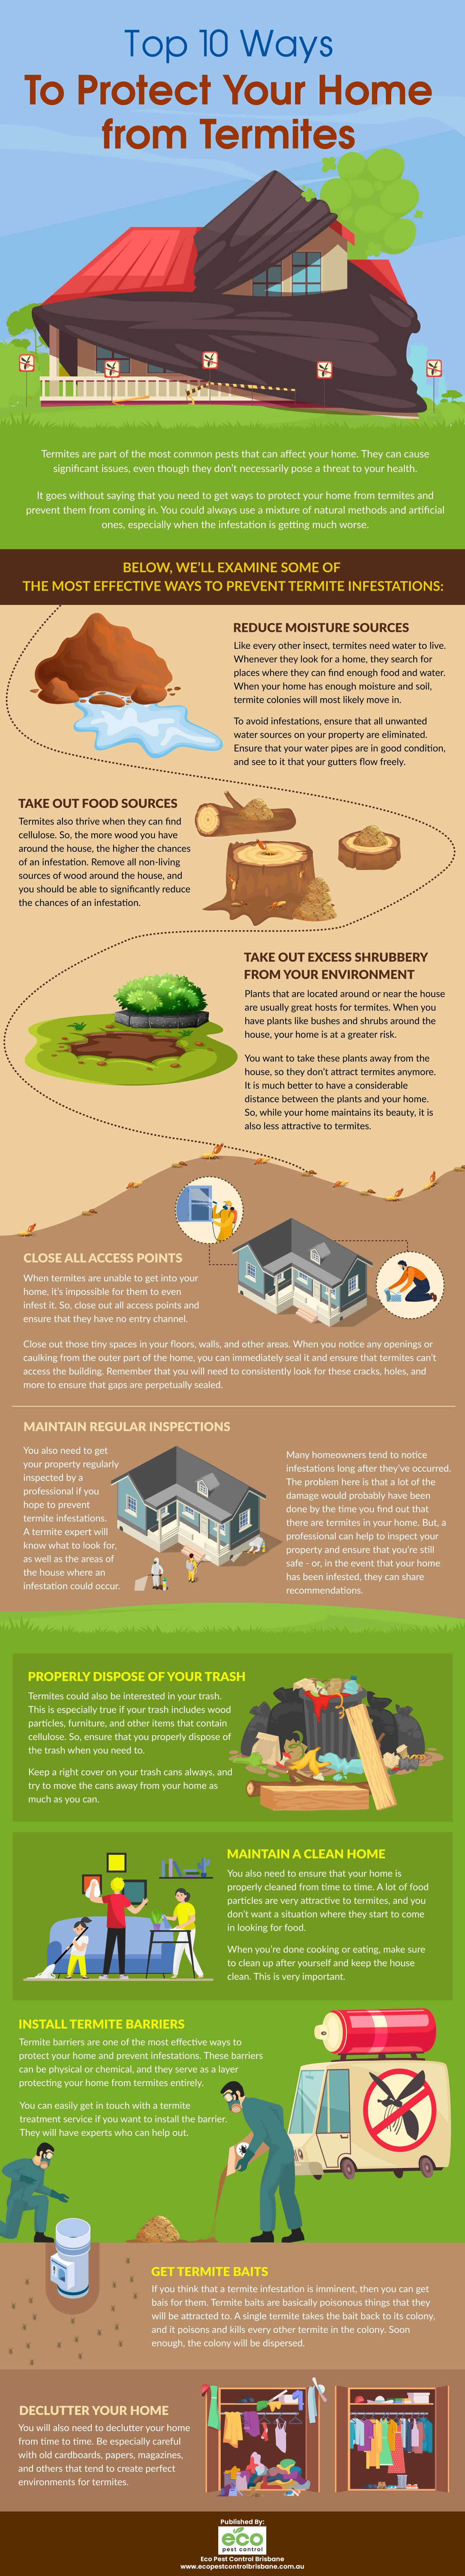 Top 10 Ways To Protect Your Home From Termites